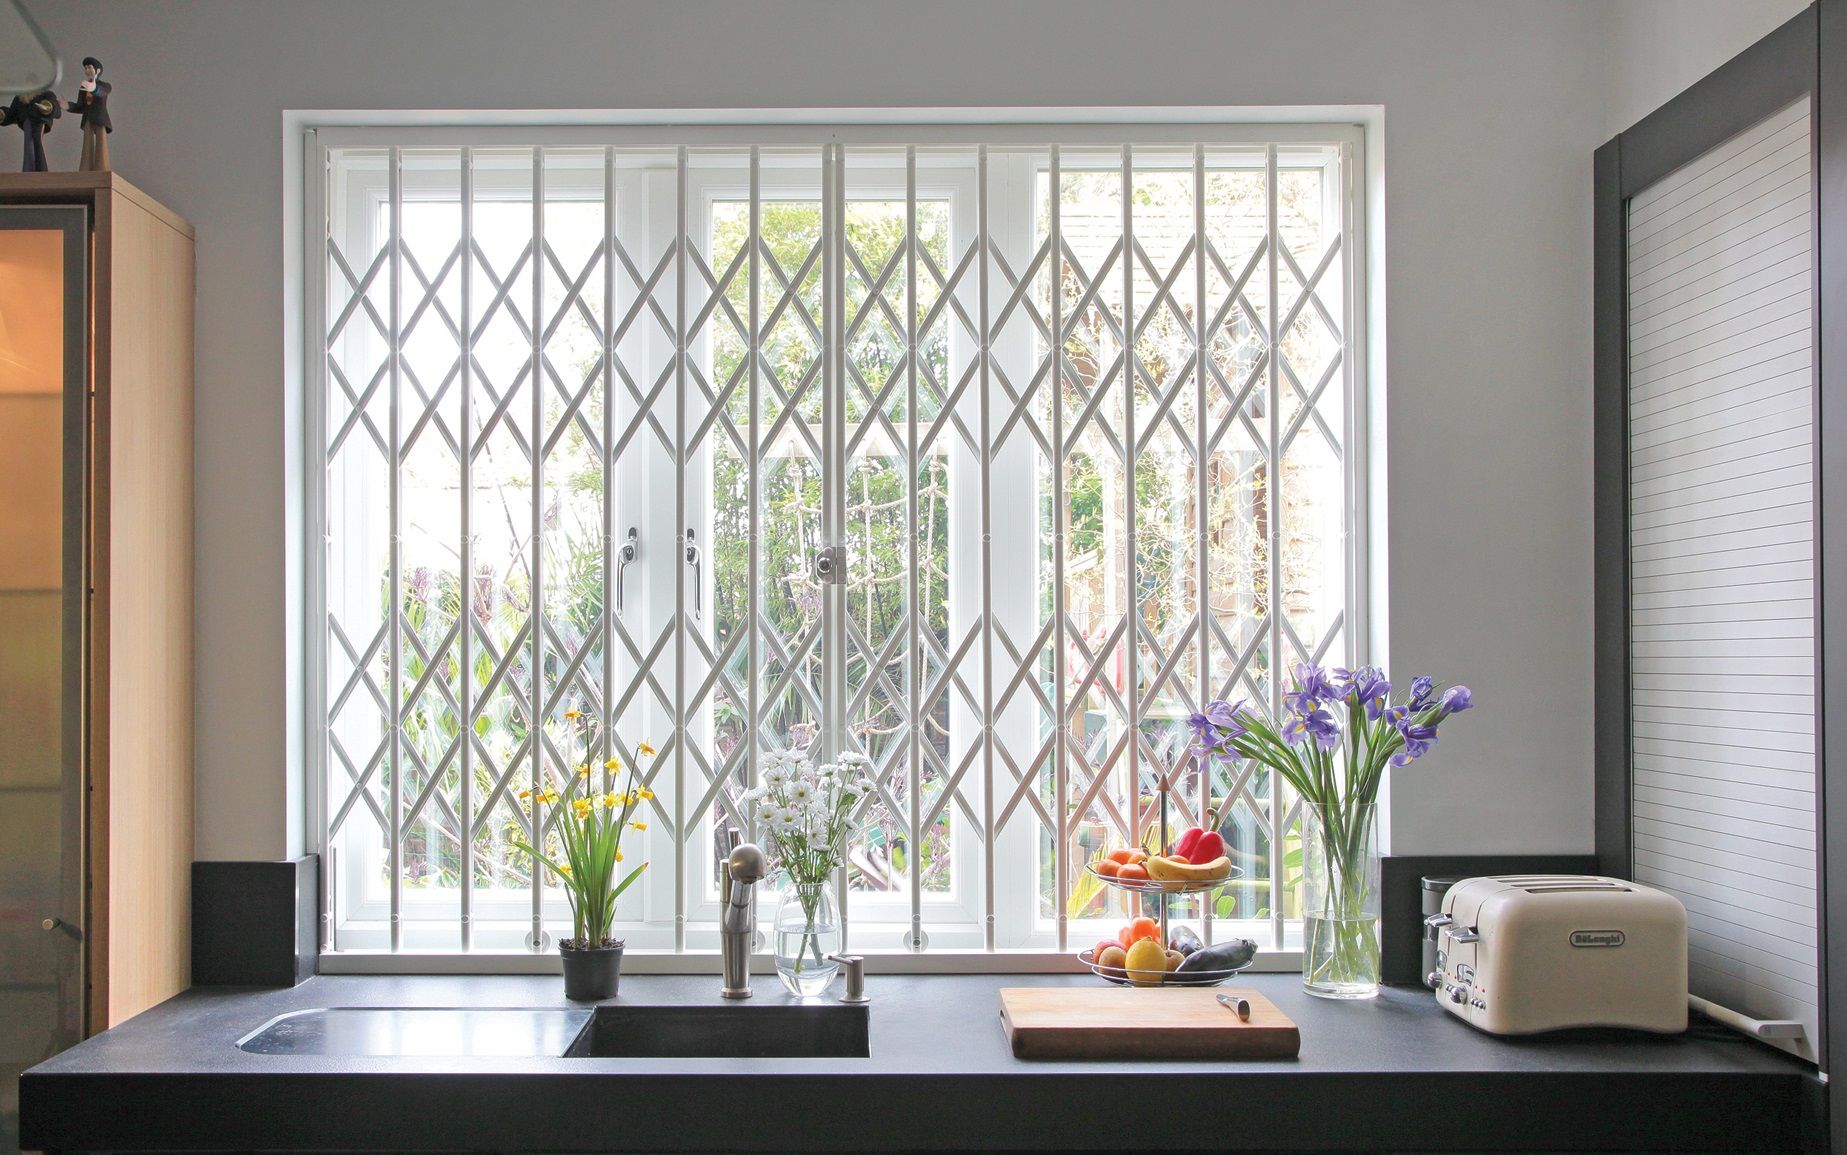 Windows with Grilles in the kitchen